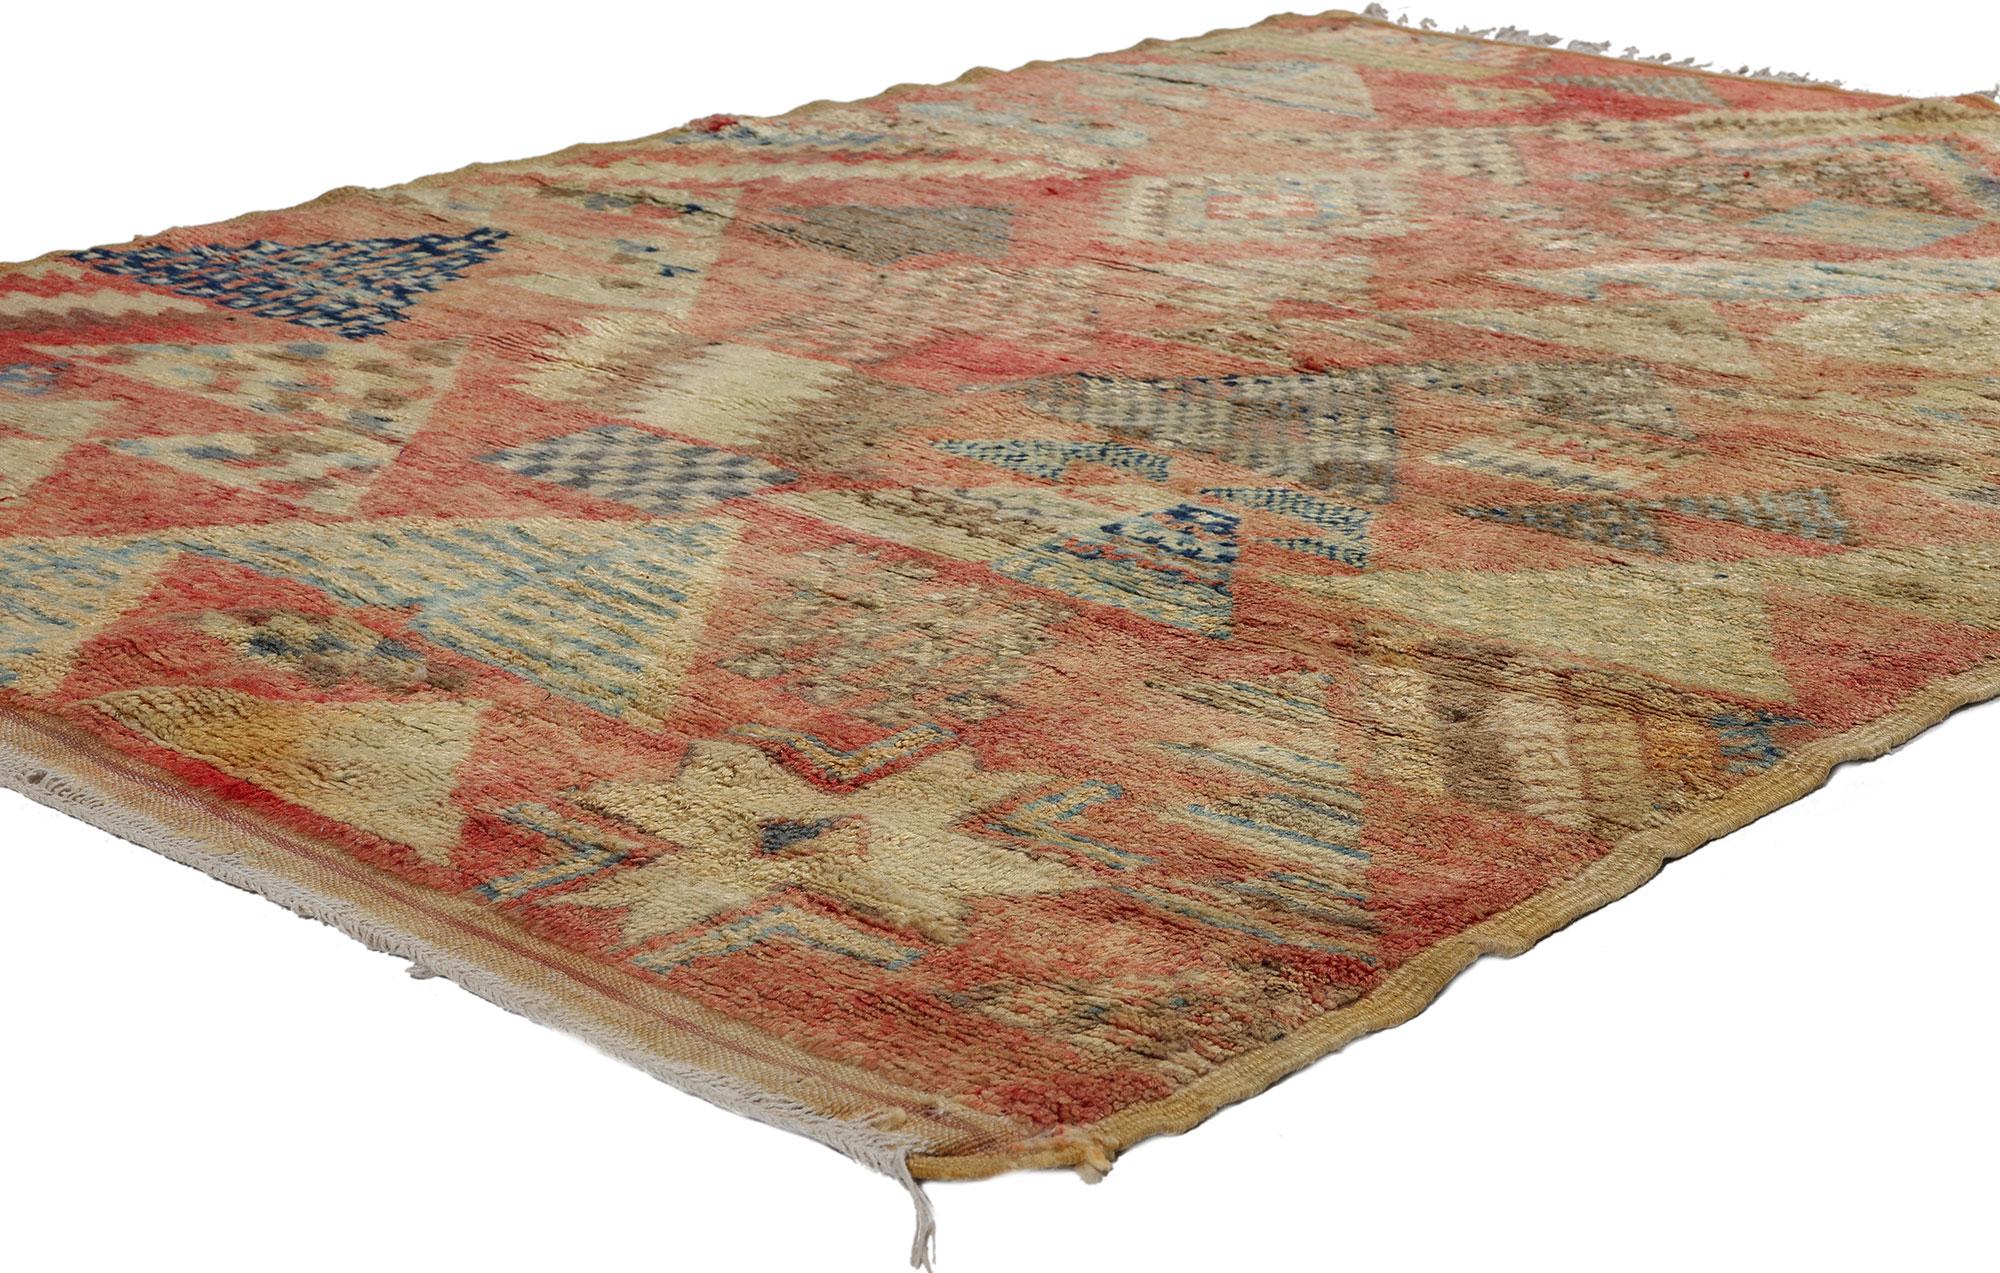 21720 Vintage Red Taznakht Moroccan Rug, 04'08 x 06'06. Taznakht Moroccan rugs are exquisite handwoven creations that trace their origins to the Taznakht region nestled in the High Atlas Mountains of Morocco. Crafted with care by skilled Berber